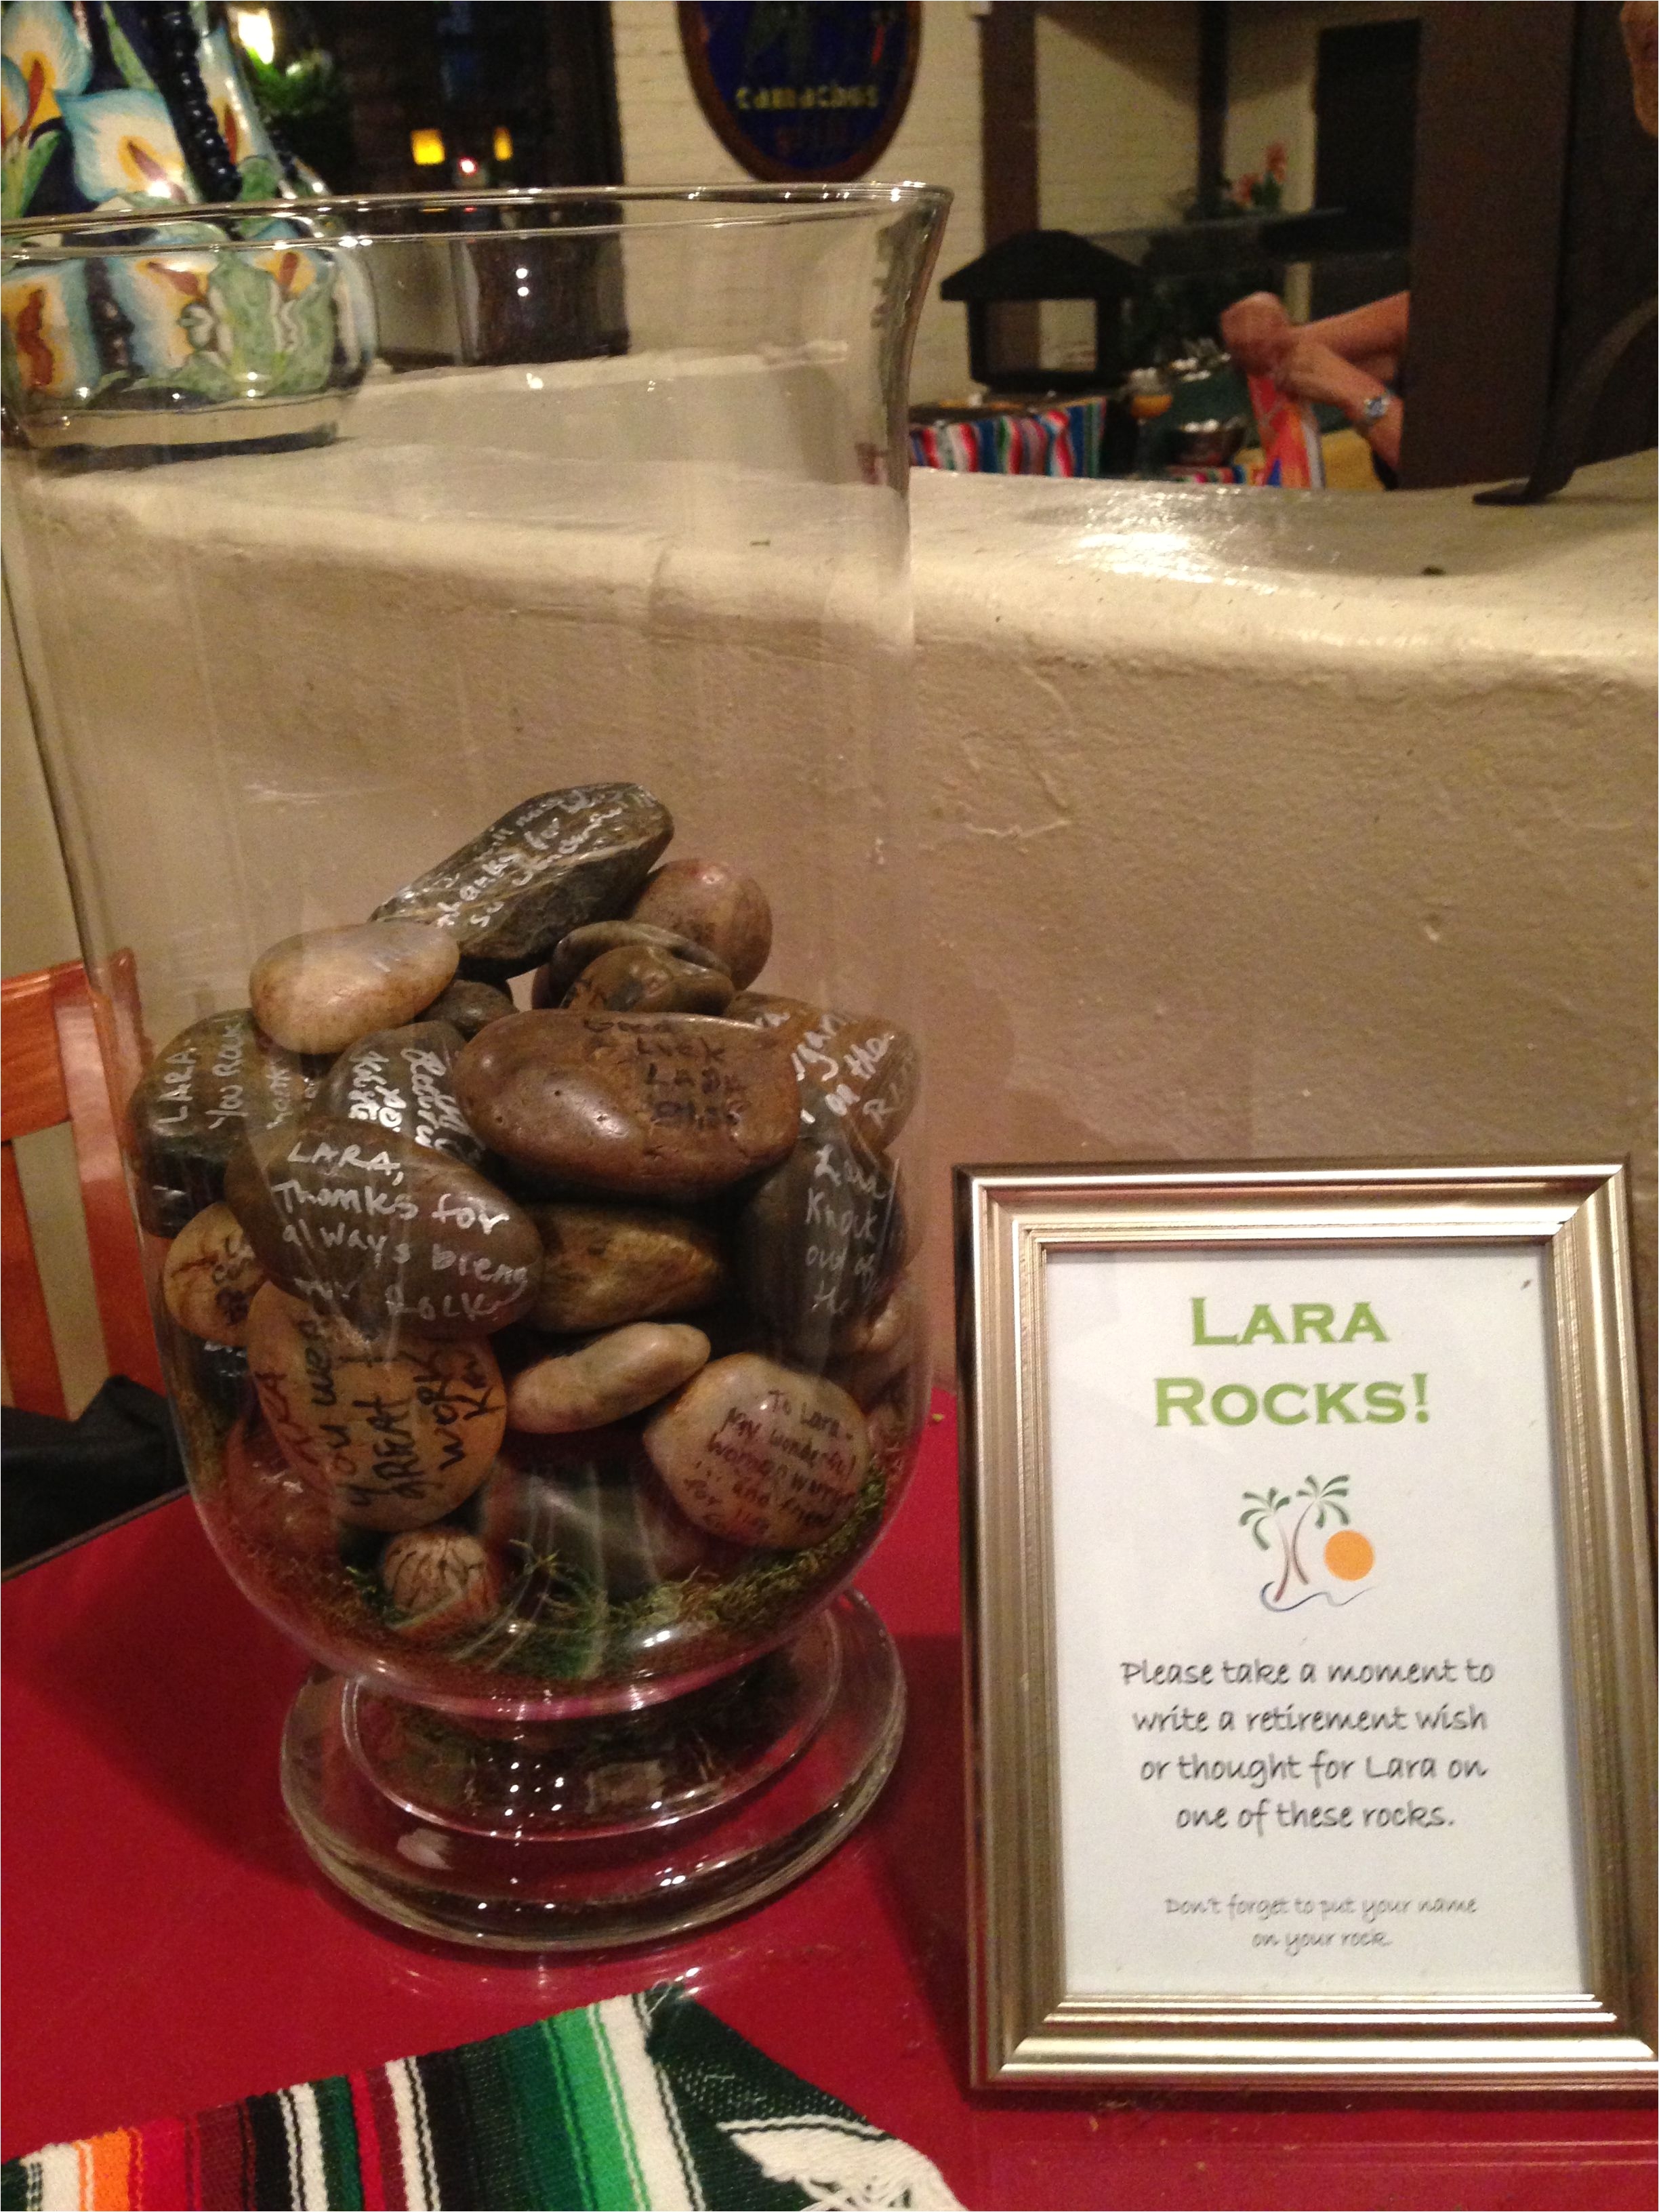 retirement party idea everyone wrote wishes and farewell messages on rocks and put it in vase retiree loved it